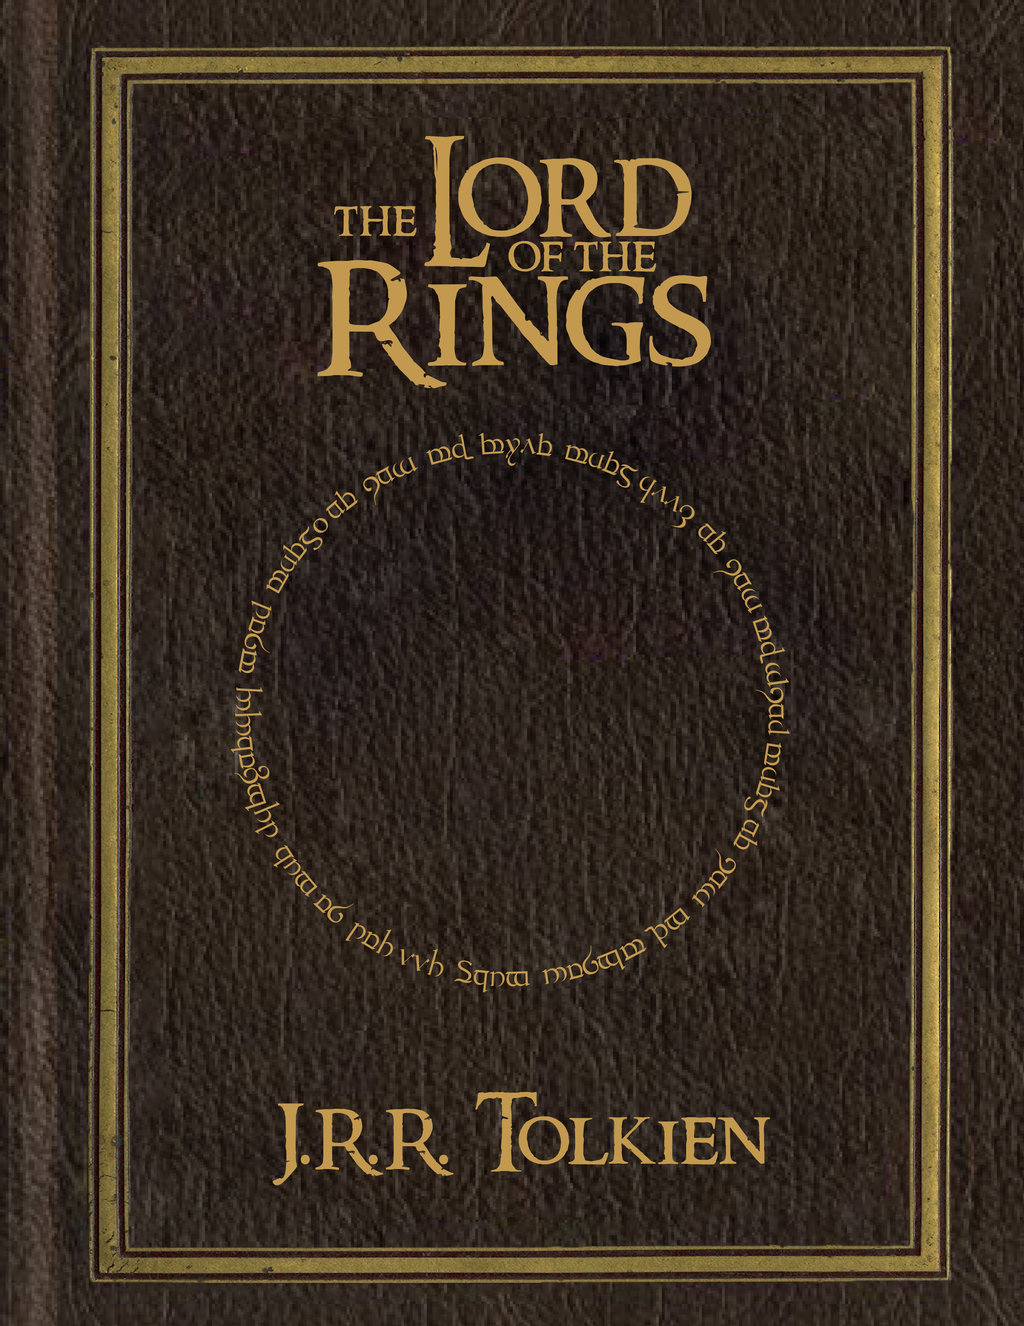 the lord of the rings original book cover